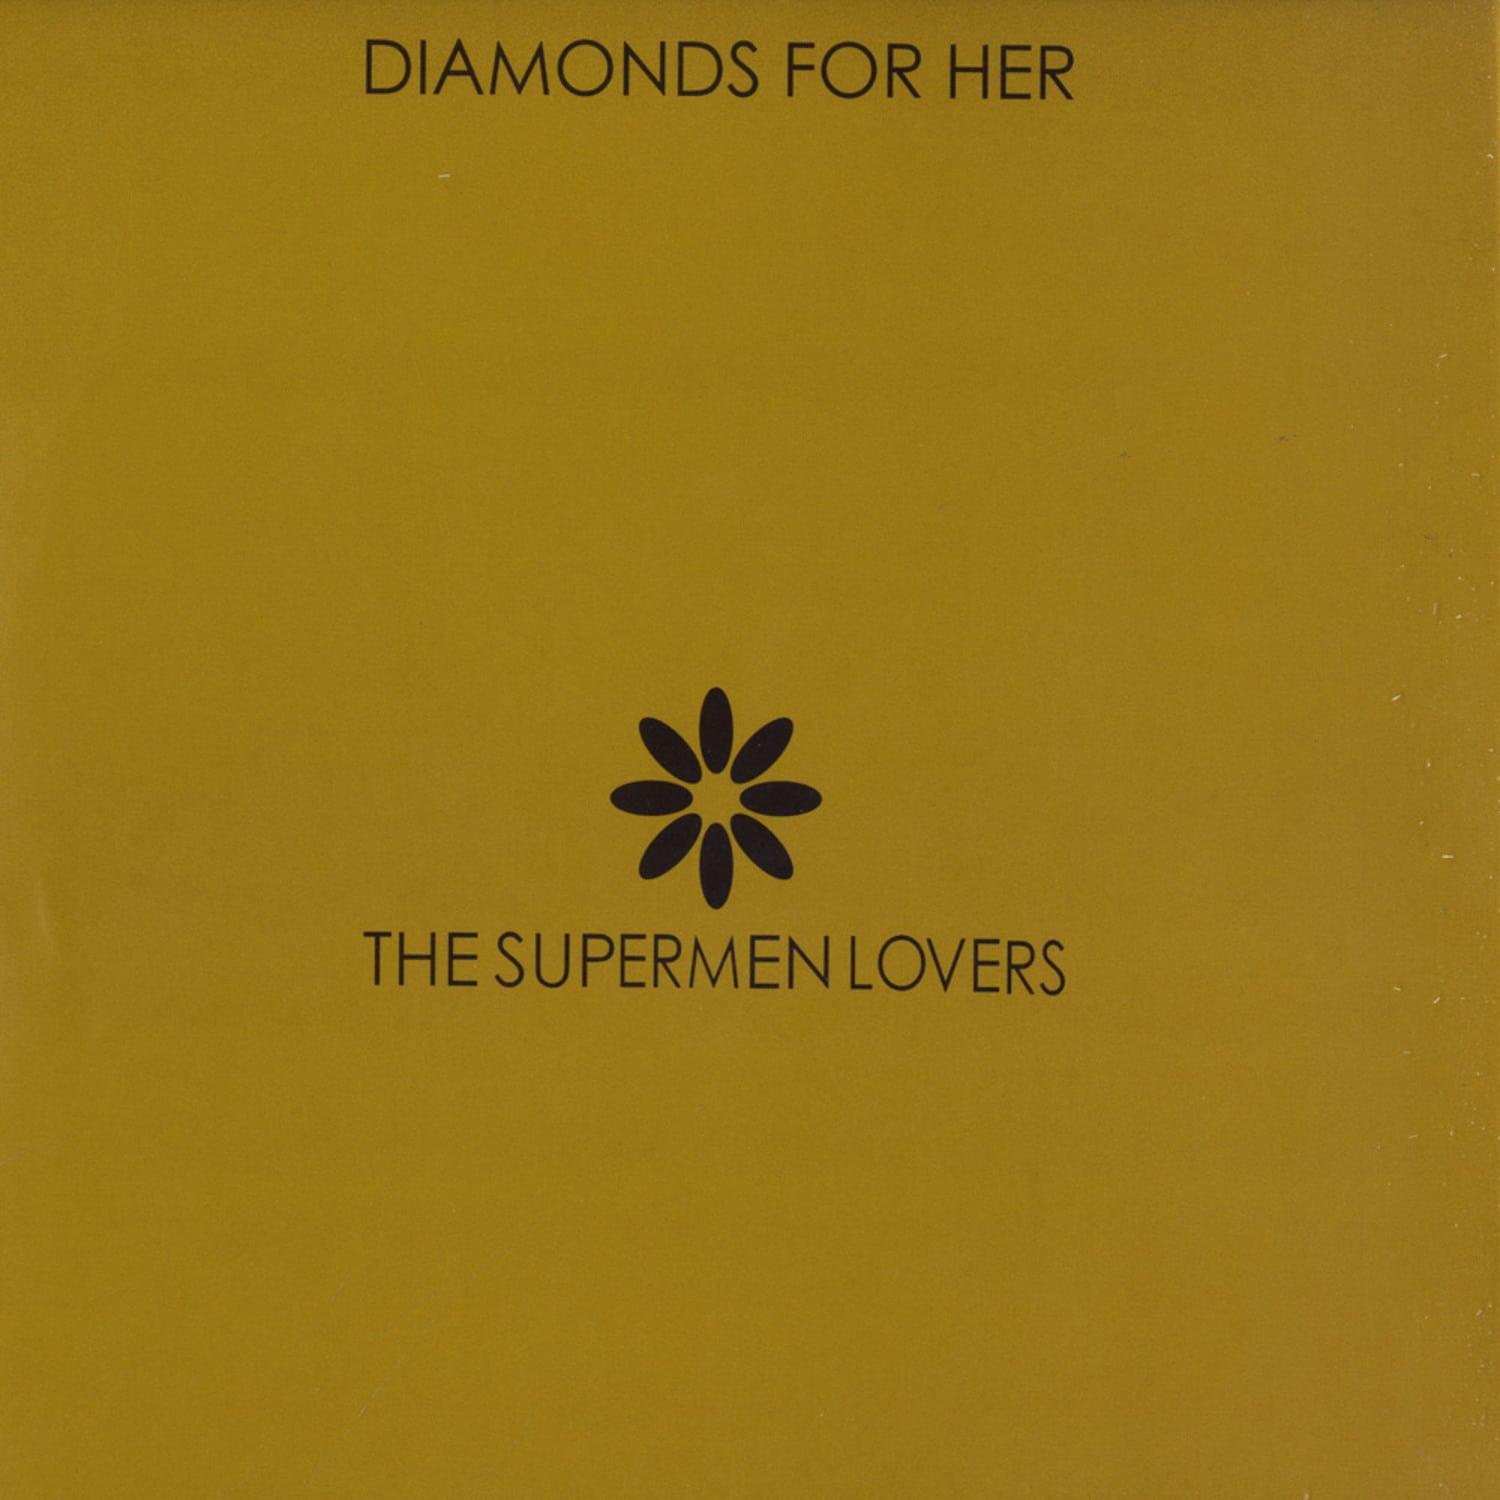 The Superman Lovers - DIAMONDS FOR HER